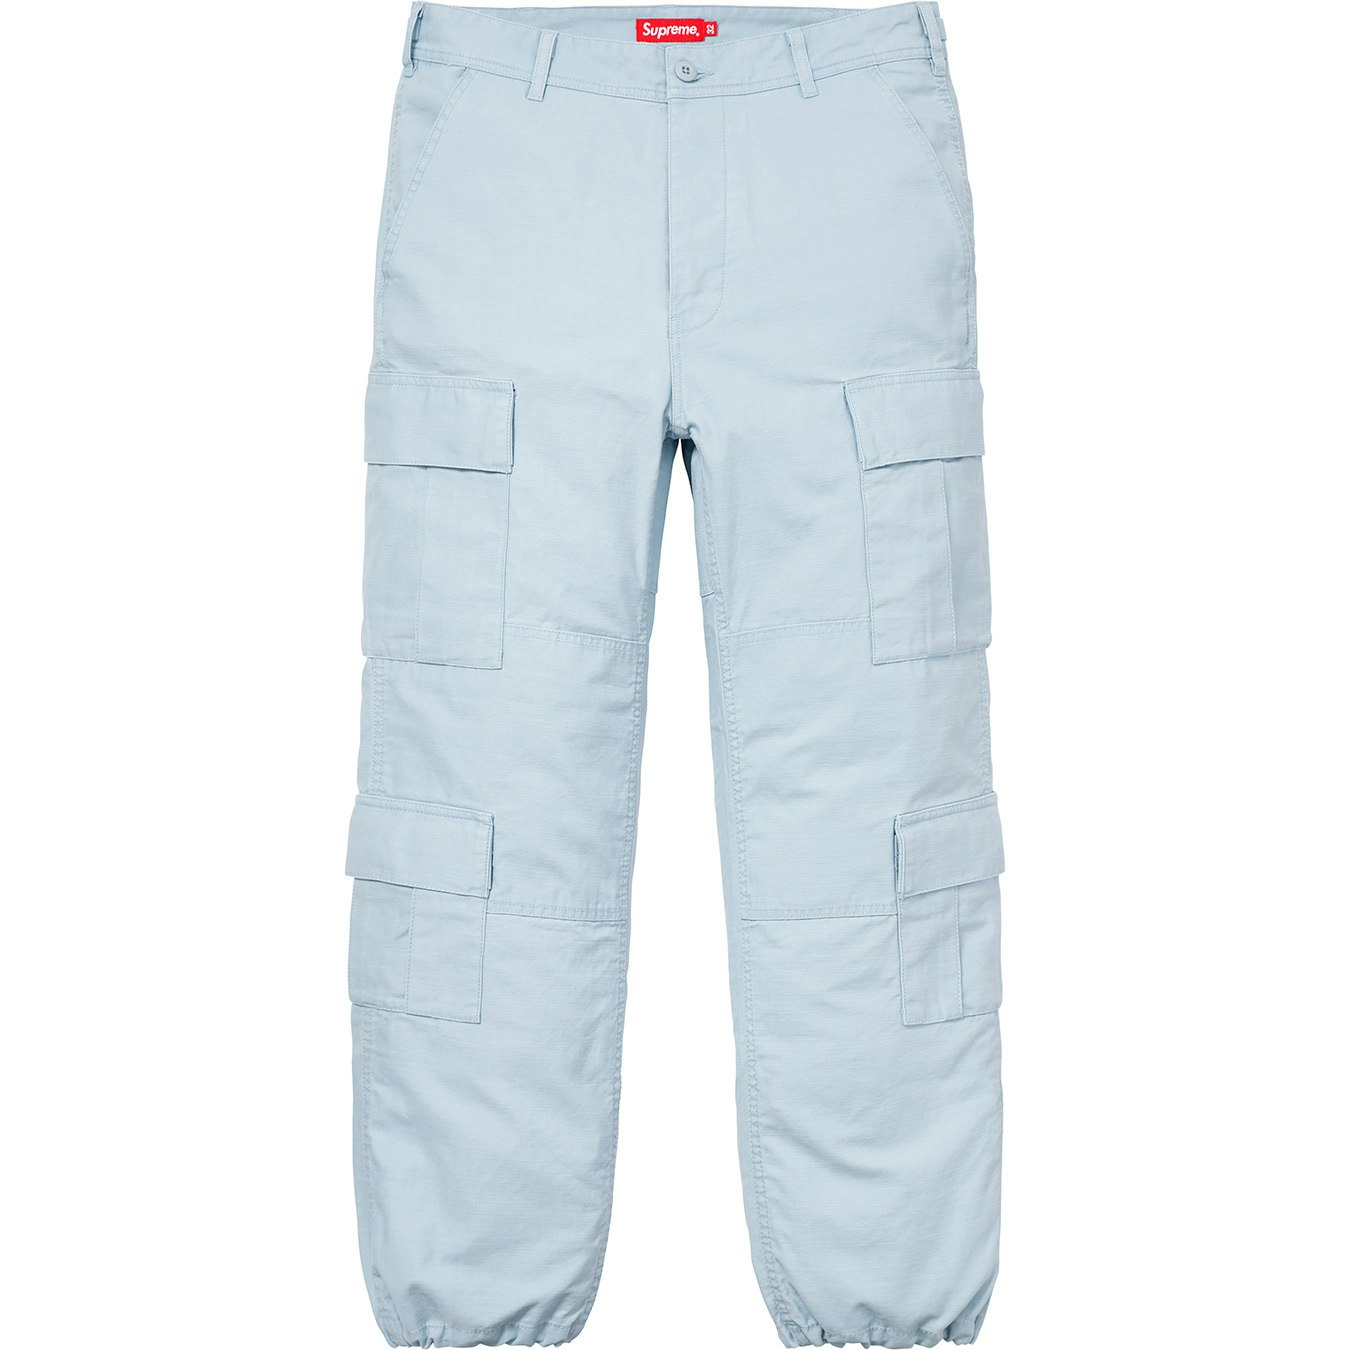 Buy Nuon Light Blue Mid-Rise Cargo Jeans from Westside